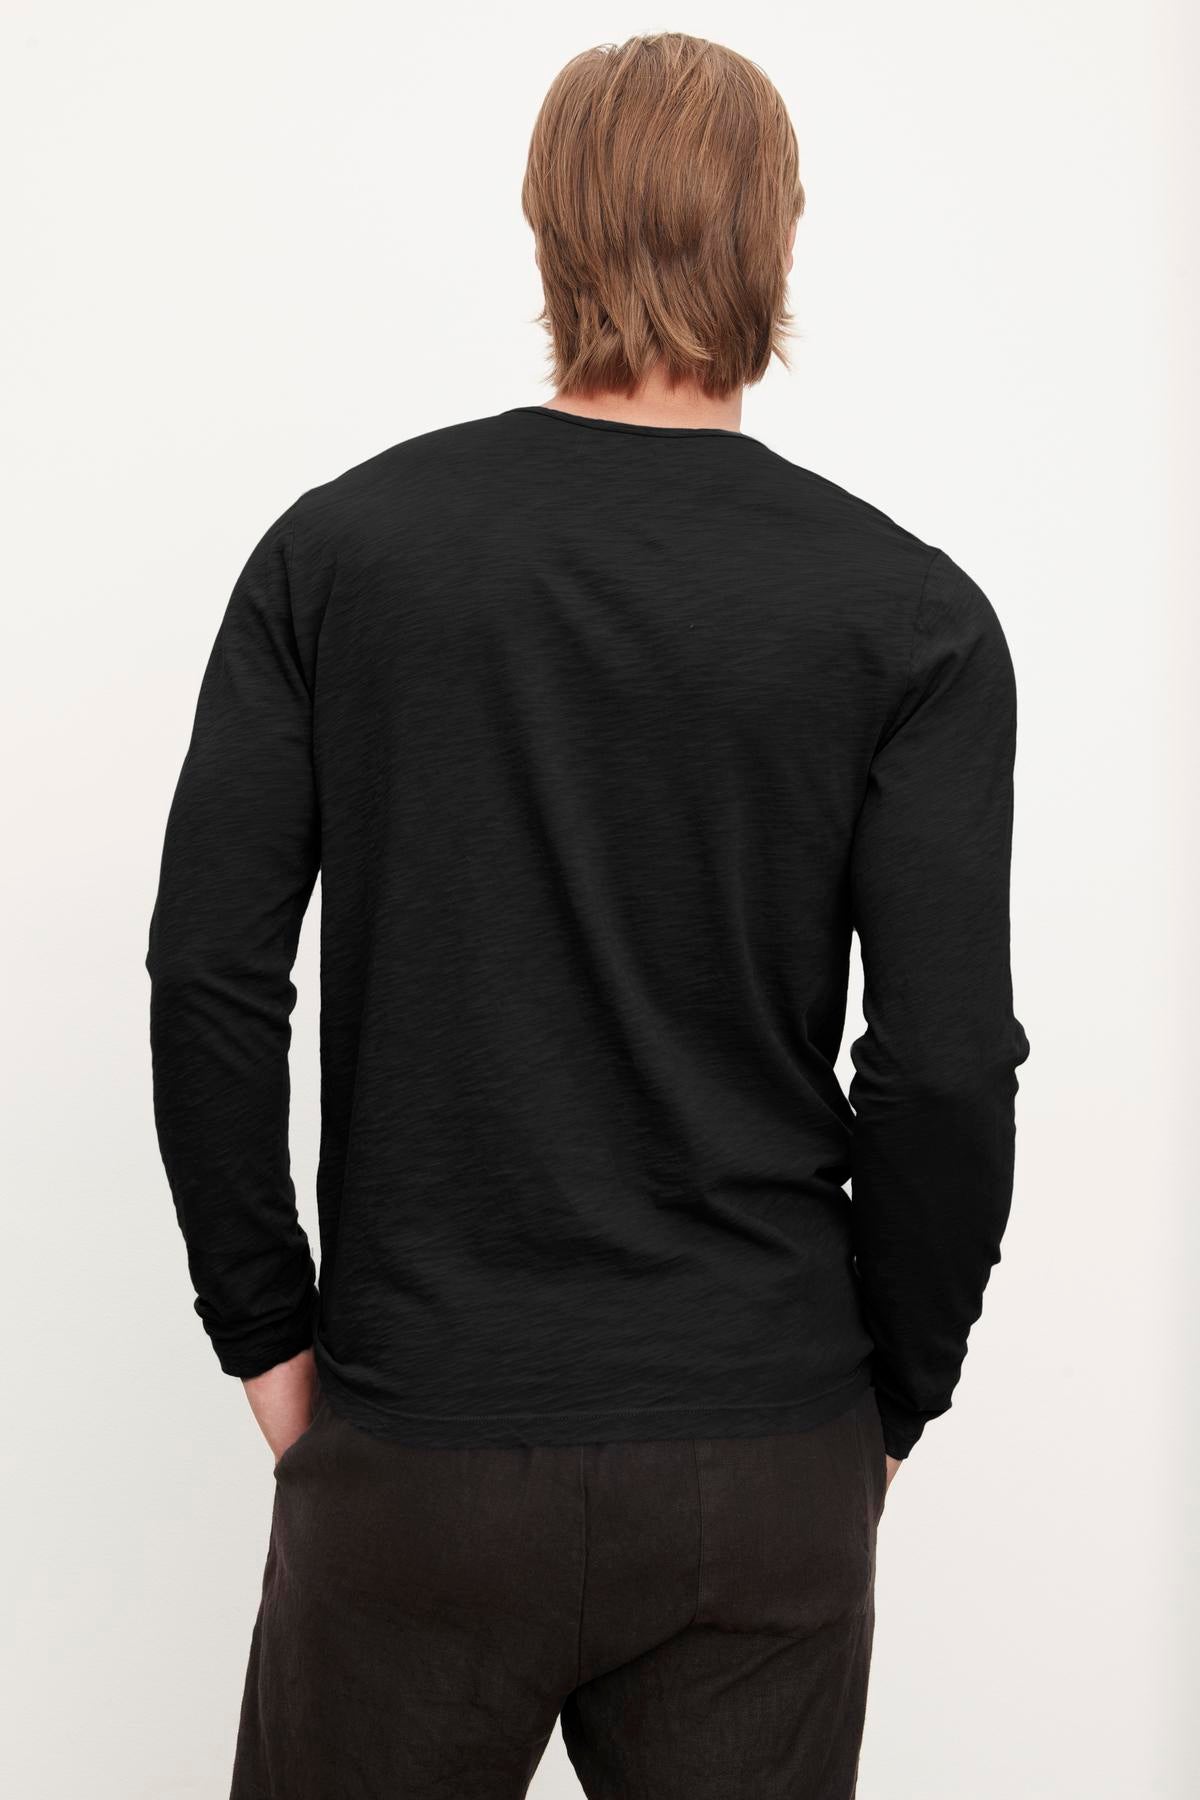 A person with long hair, wearing a black long-sleeved SIMEON RAW EDGE COTTON SLUB TEE by Velvet by Graham & Spencer, photographed from the back, embodying California heritage.-36418291138753